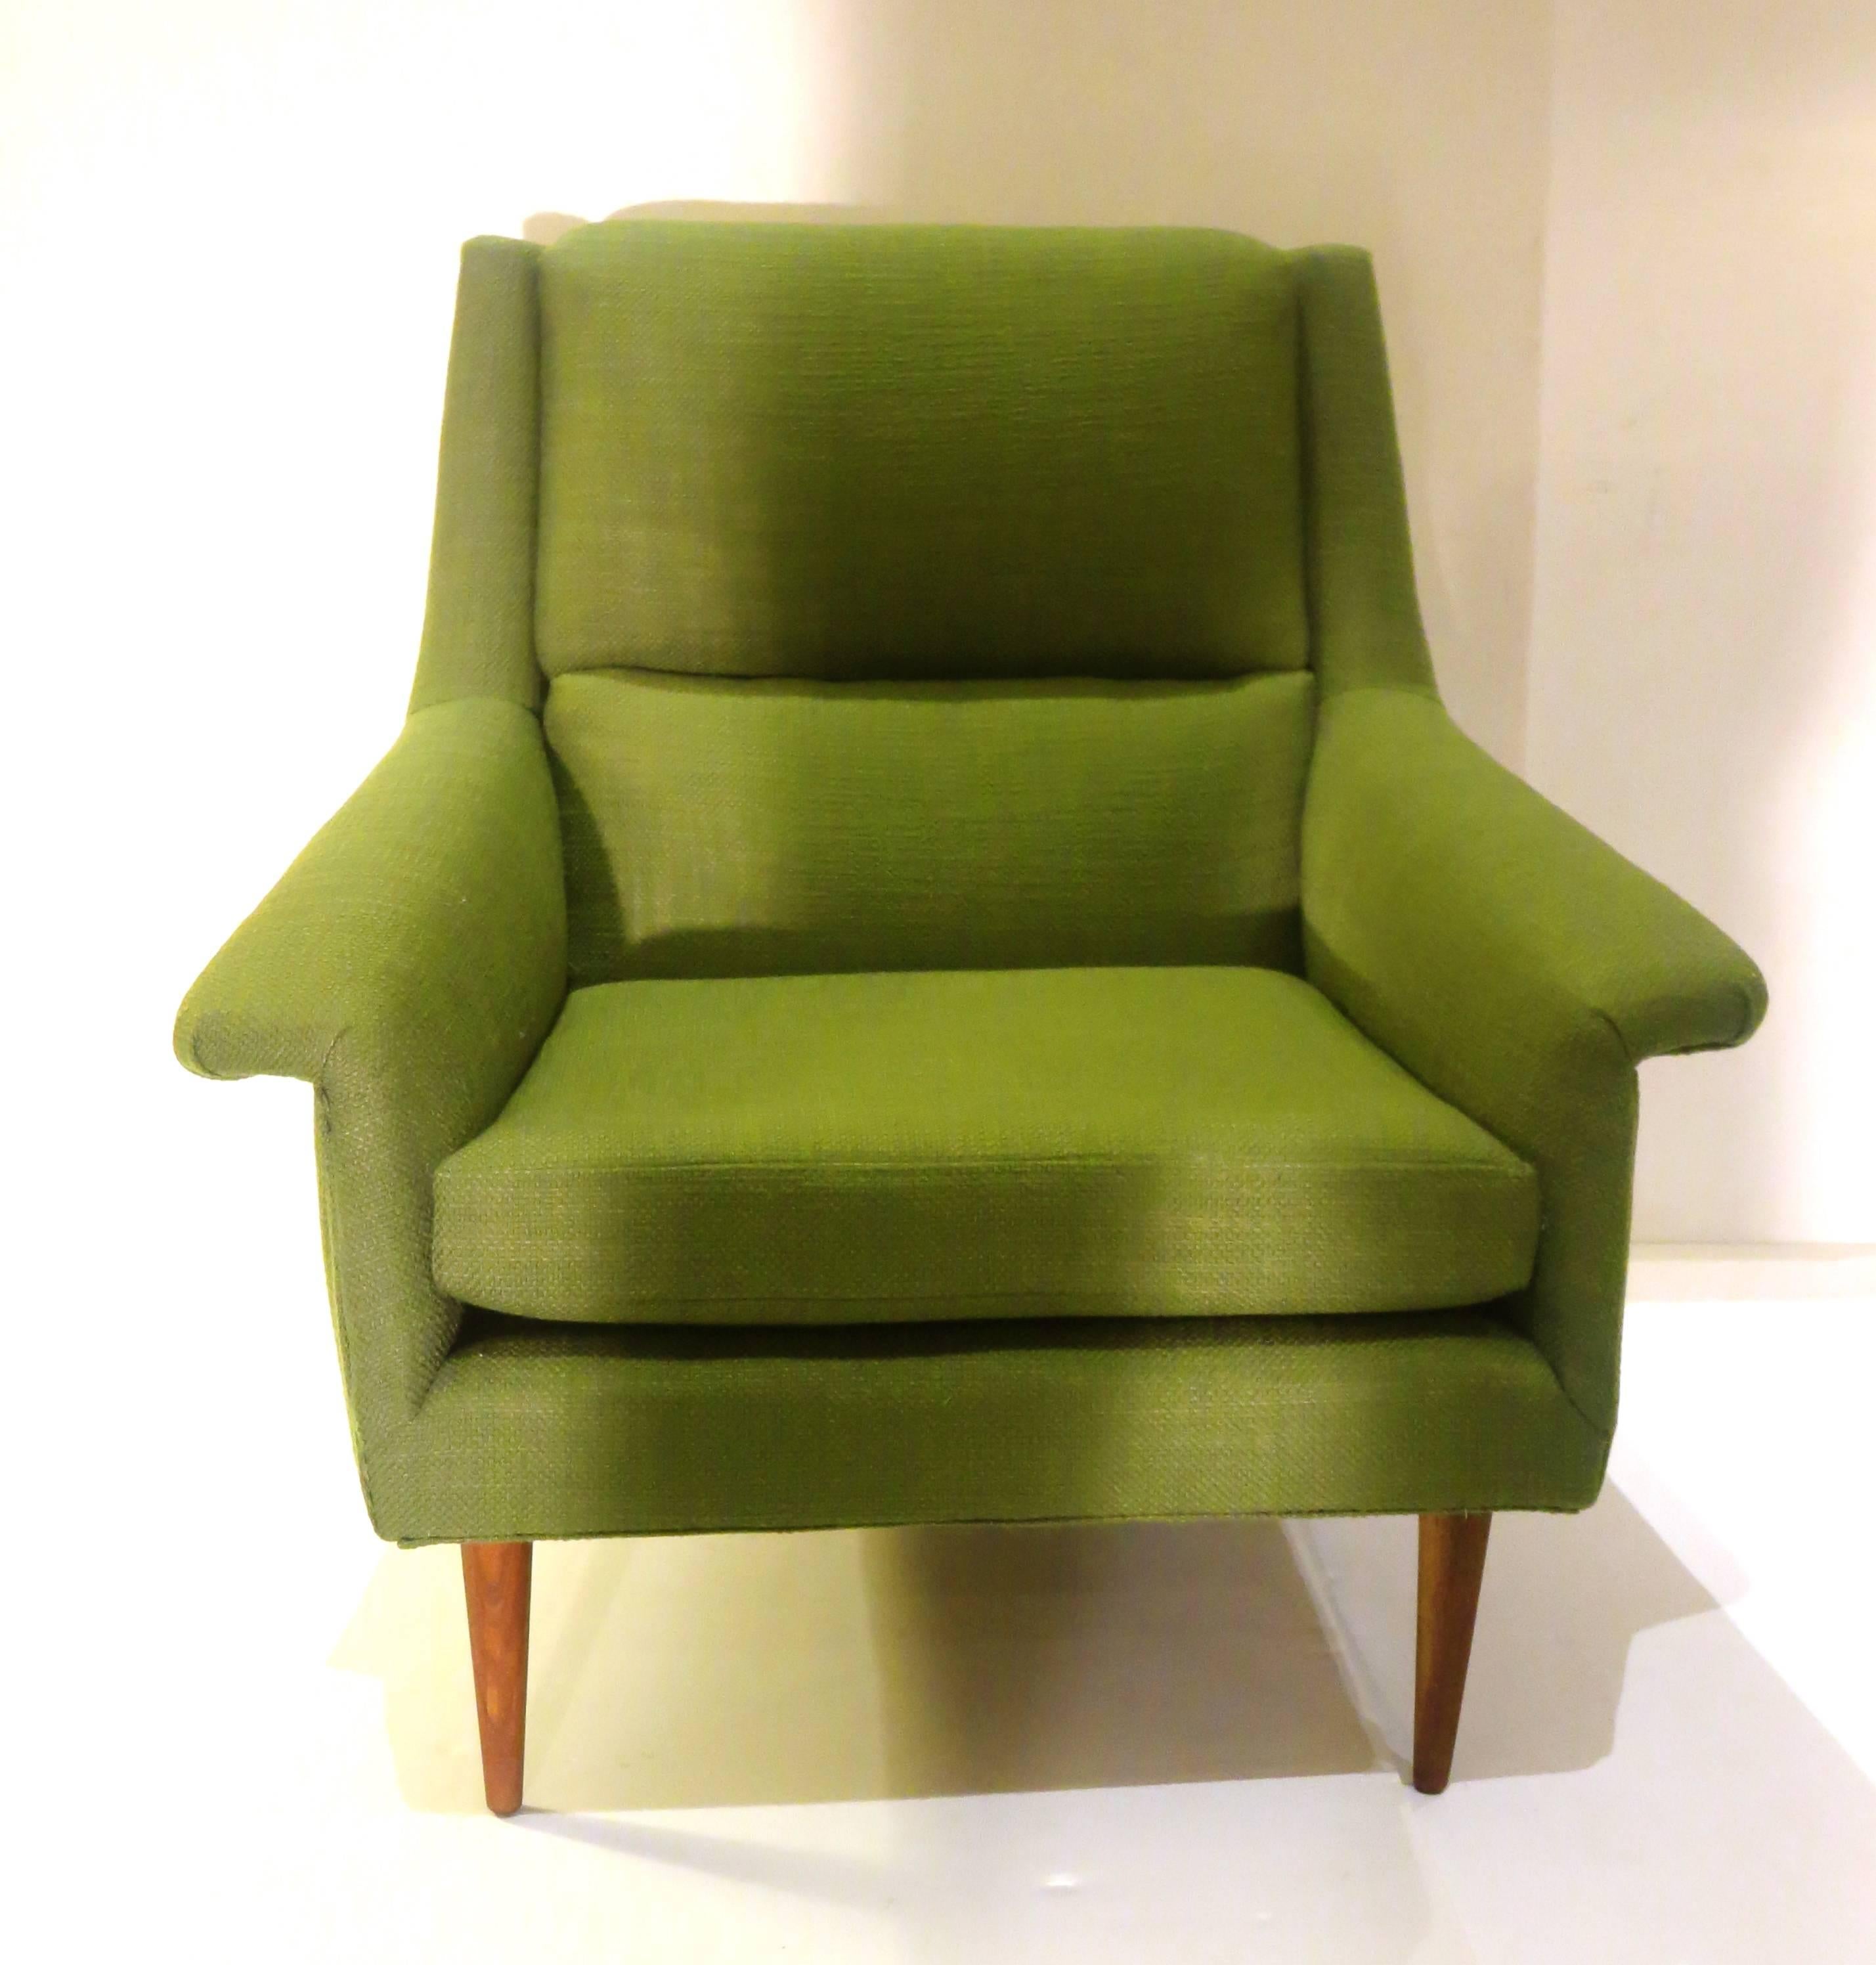 Classic Danish modern arm lounge chair manufactured by Dux of Sweden circa 1950s , freshly recover in kelly green tweed material , sitting in 4 solid teak tappered legs , solid and sturdy , beautiful lines nice and comfy.